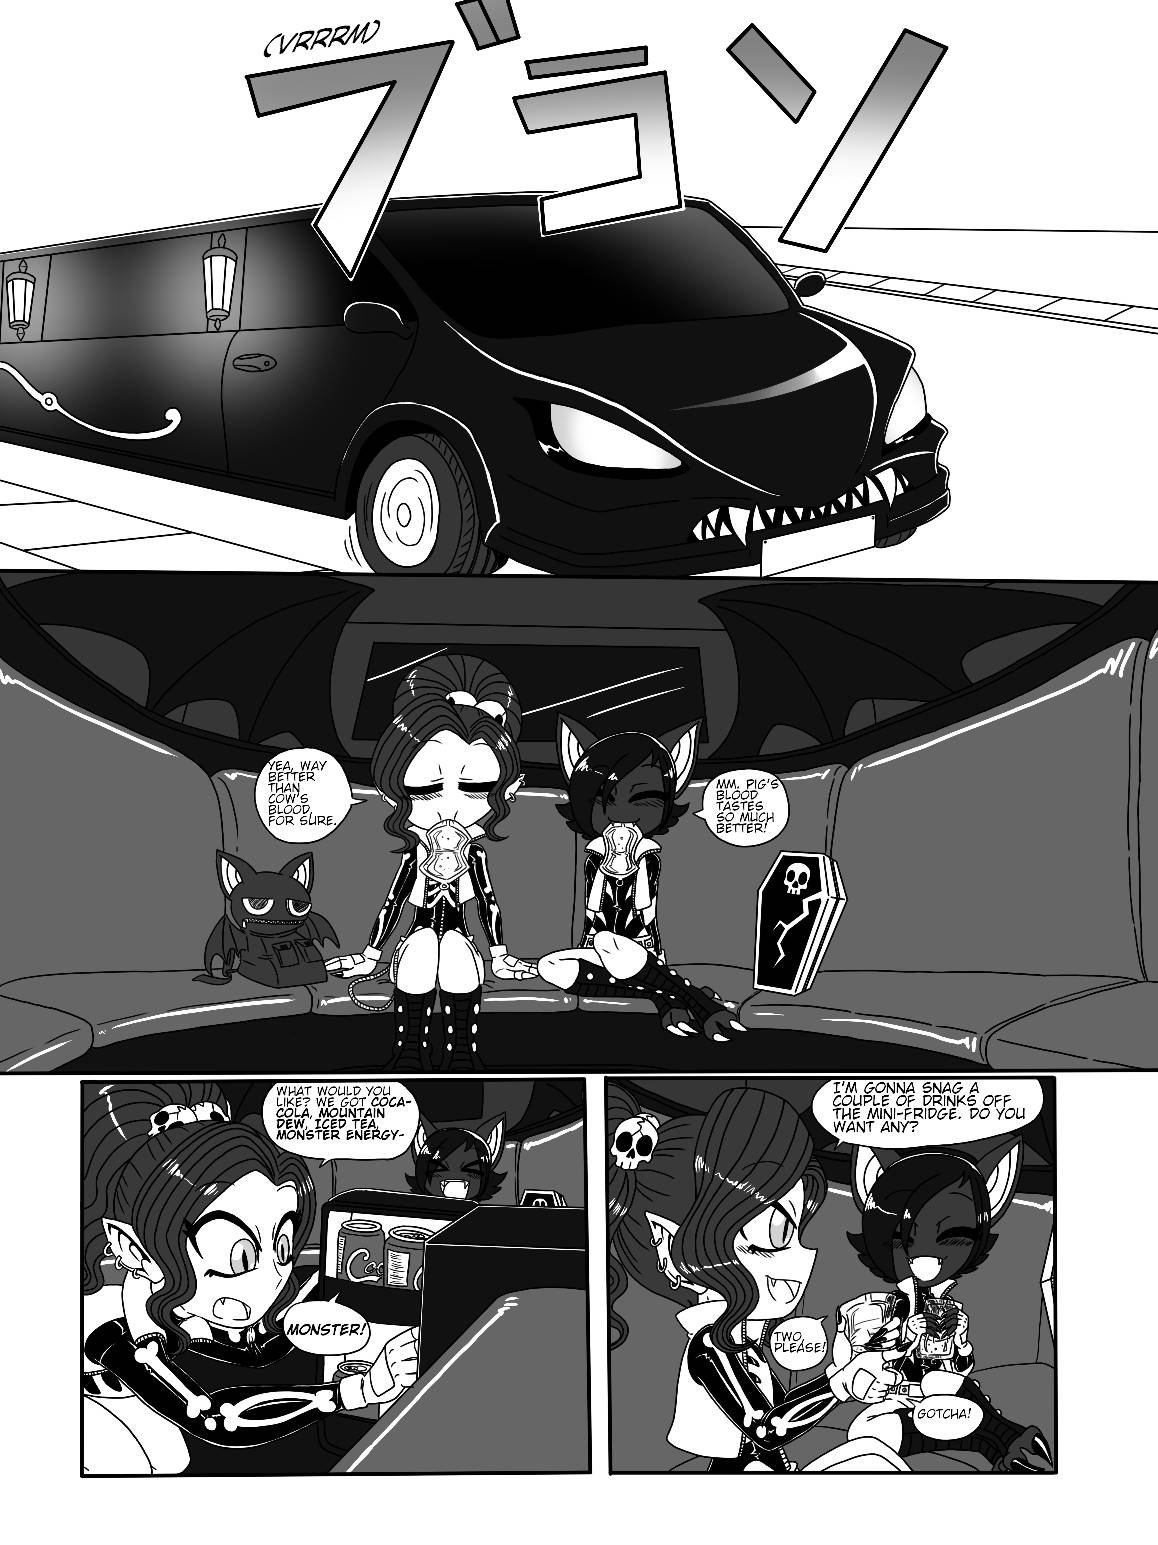 Back to School - Chapter 1 - Page 8 by PlayboyVampire on DeviantArt